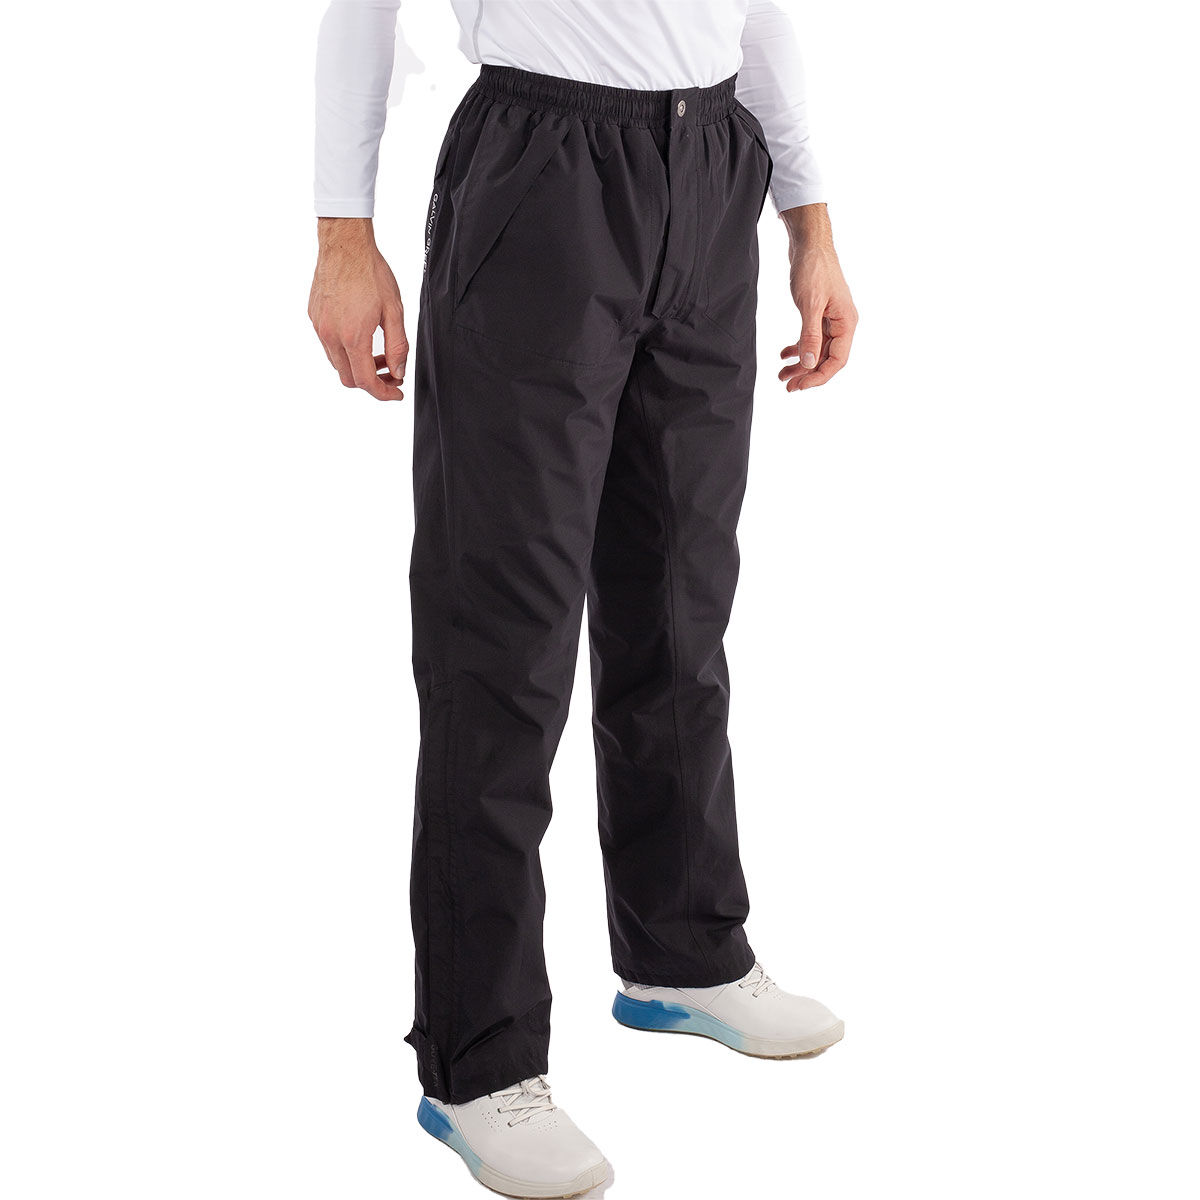 Galvin Green Mens Black Lightweight Andy GORE-TEX Waterproof Long Fit Golf Trousers, Size: M | American Golf